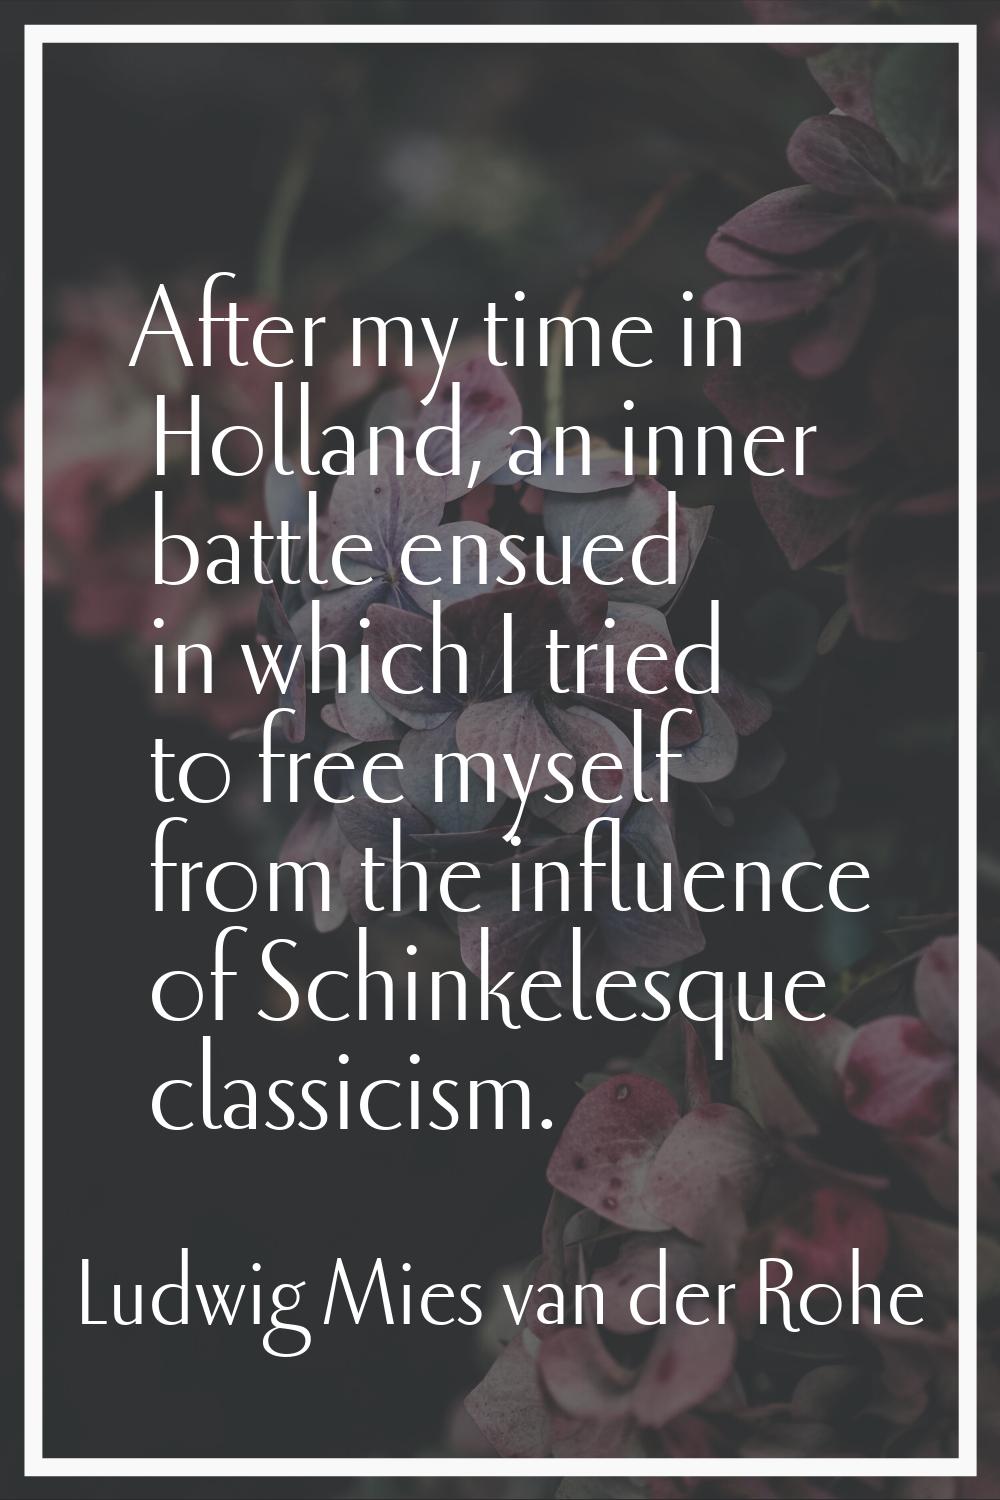 After my time in Holland, an inner battle ensued in which I tried to free myself from the influence